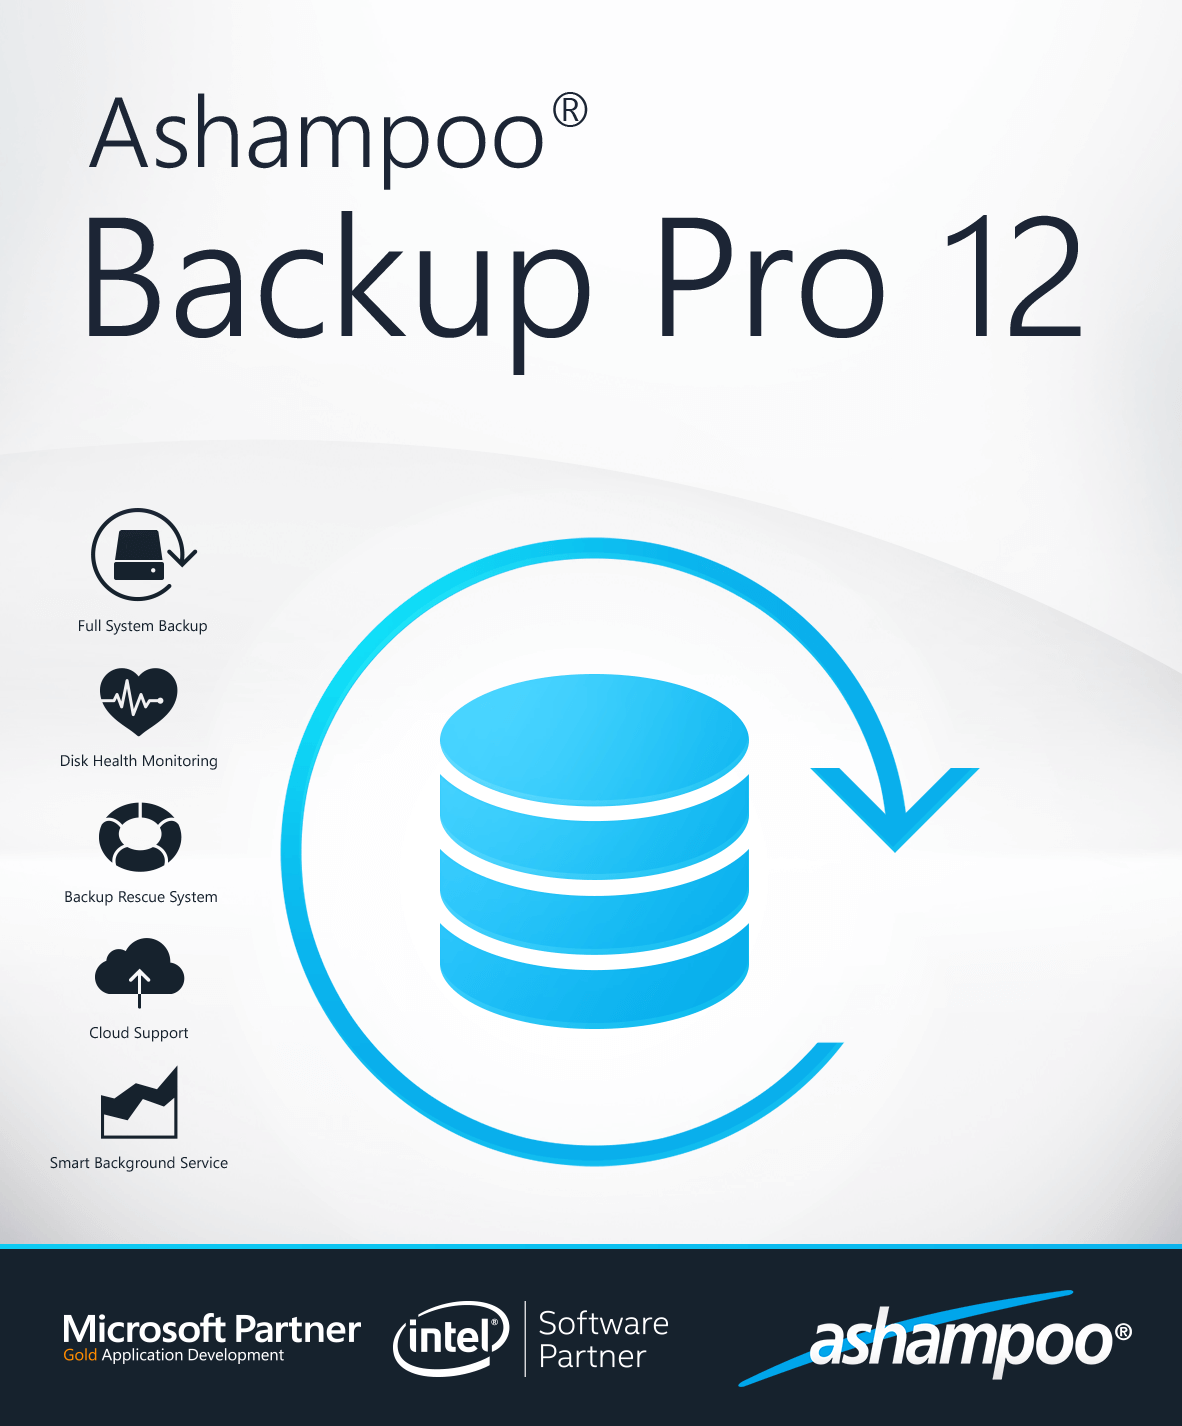 Ashampoo Backup Pro 17.06 download the new for apple